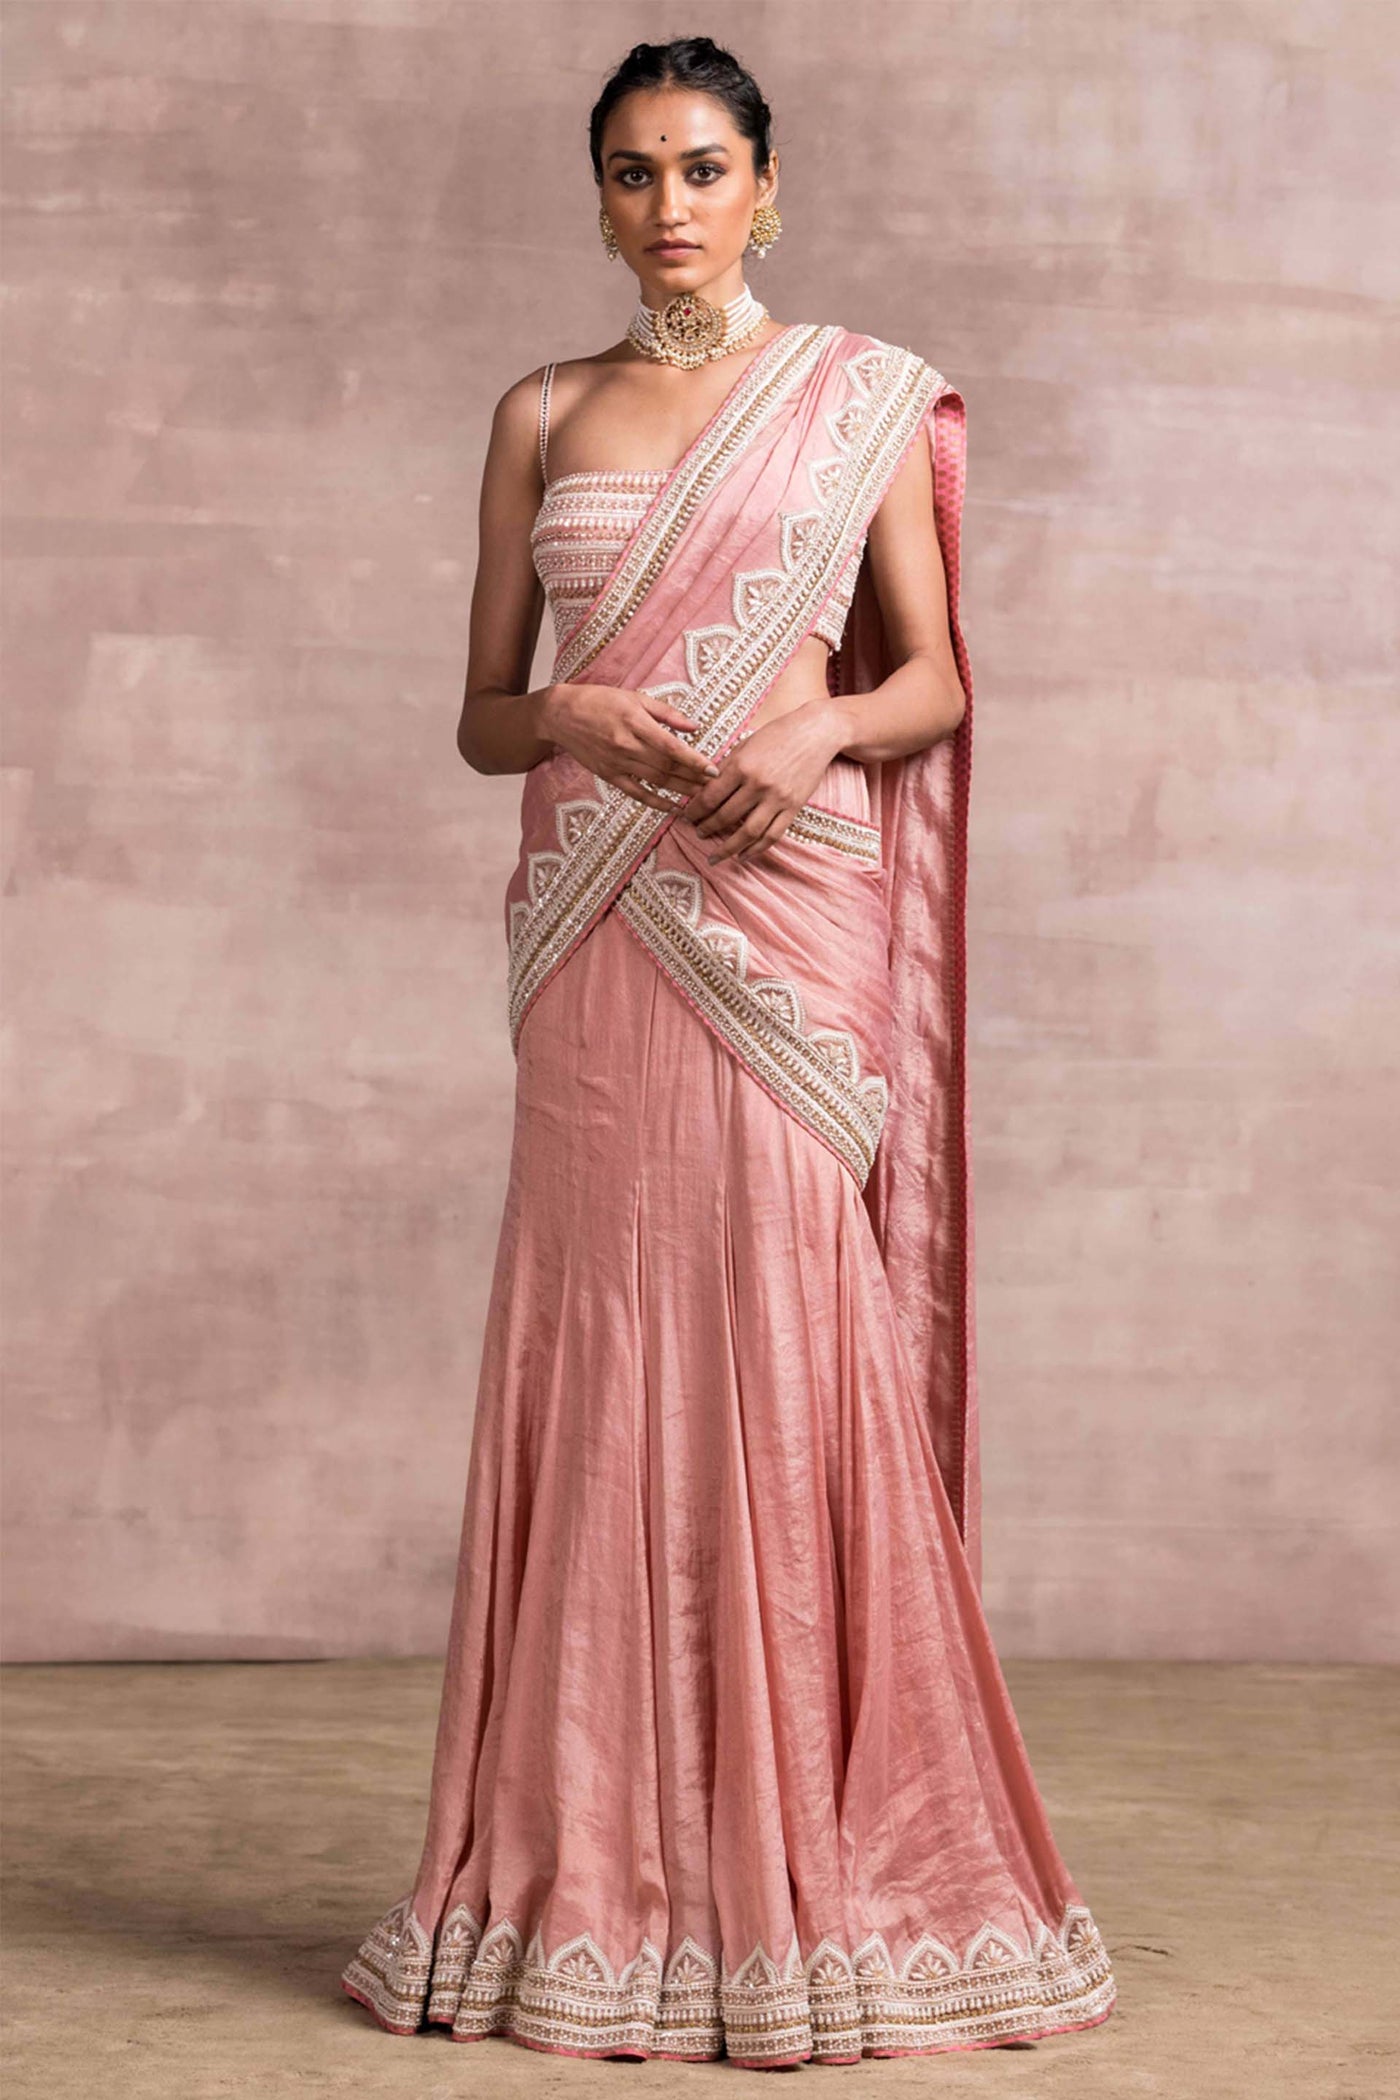 Tarun Tahiliani Kalidar Concept Saree With Resham Border Paired With Strappy Bustier peach festive indian designer wear online shopping melange singapore